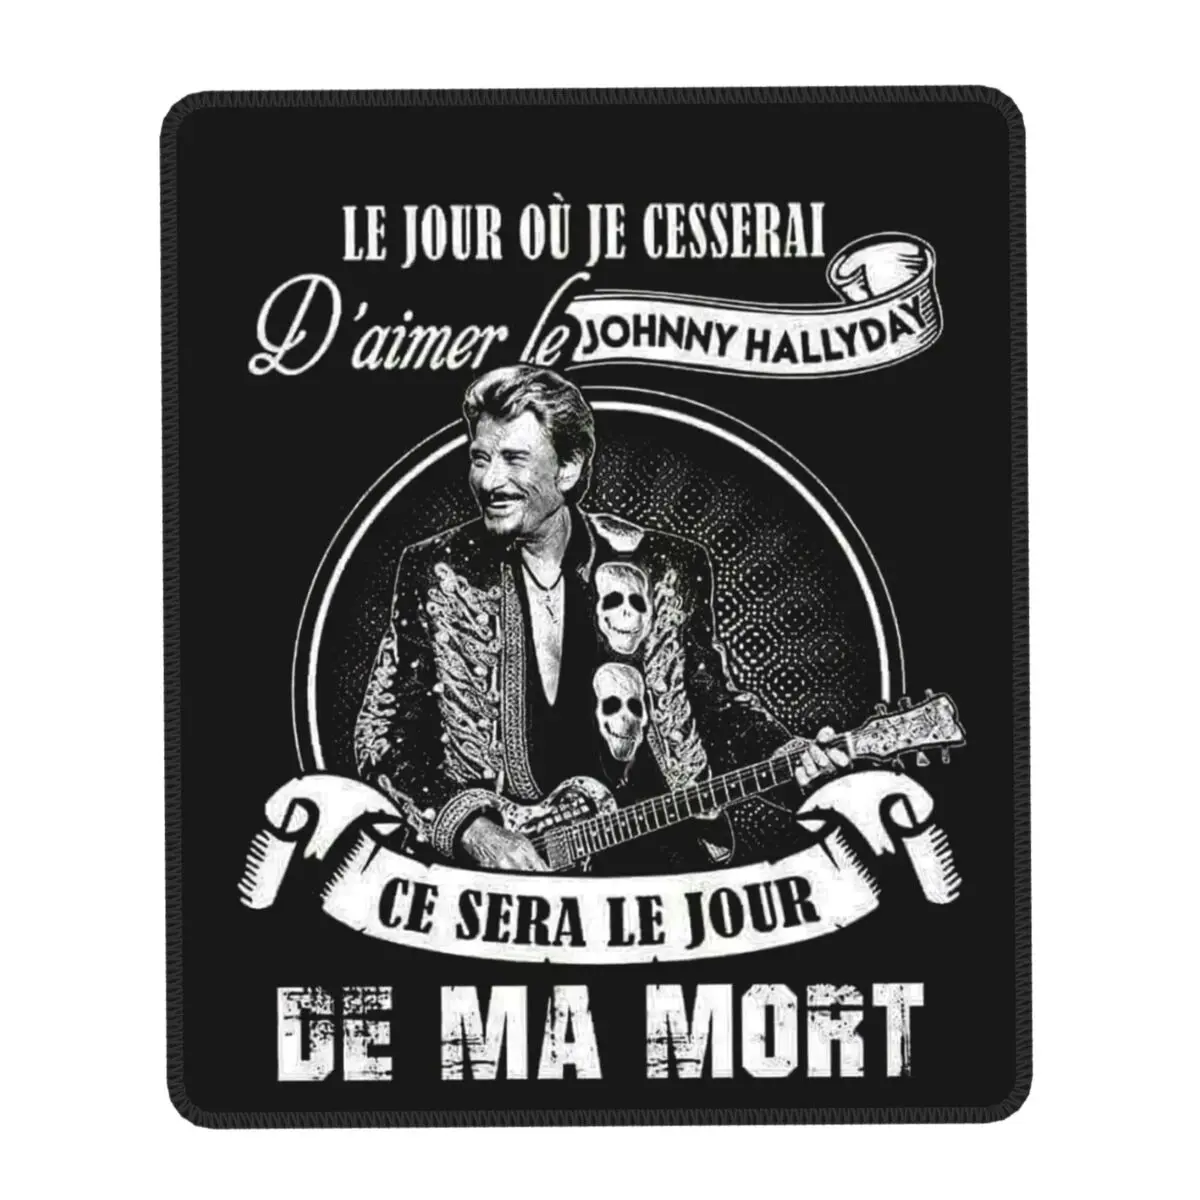 

French Rock Singer Johnny Hallyday Customized Gaming Mouse Pad Non-Slip Rubber Base Mousepad Office Computer Pc Desk Mat